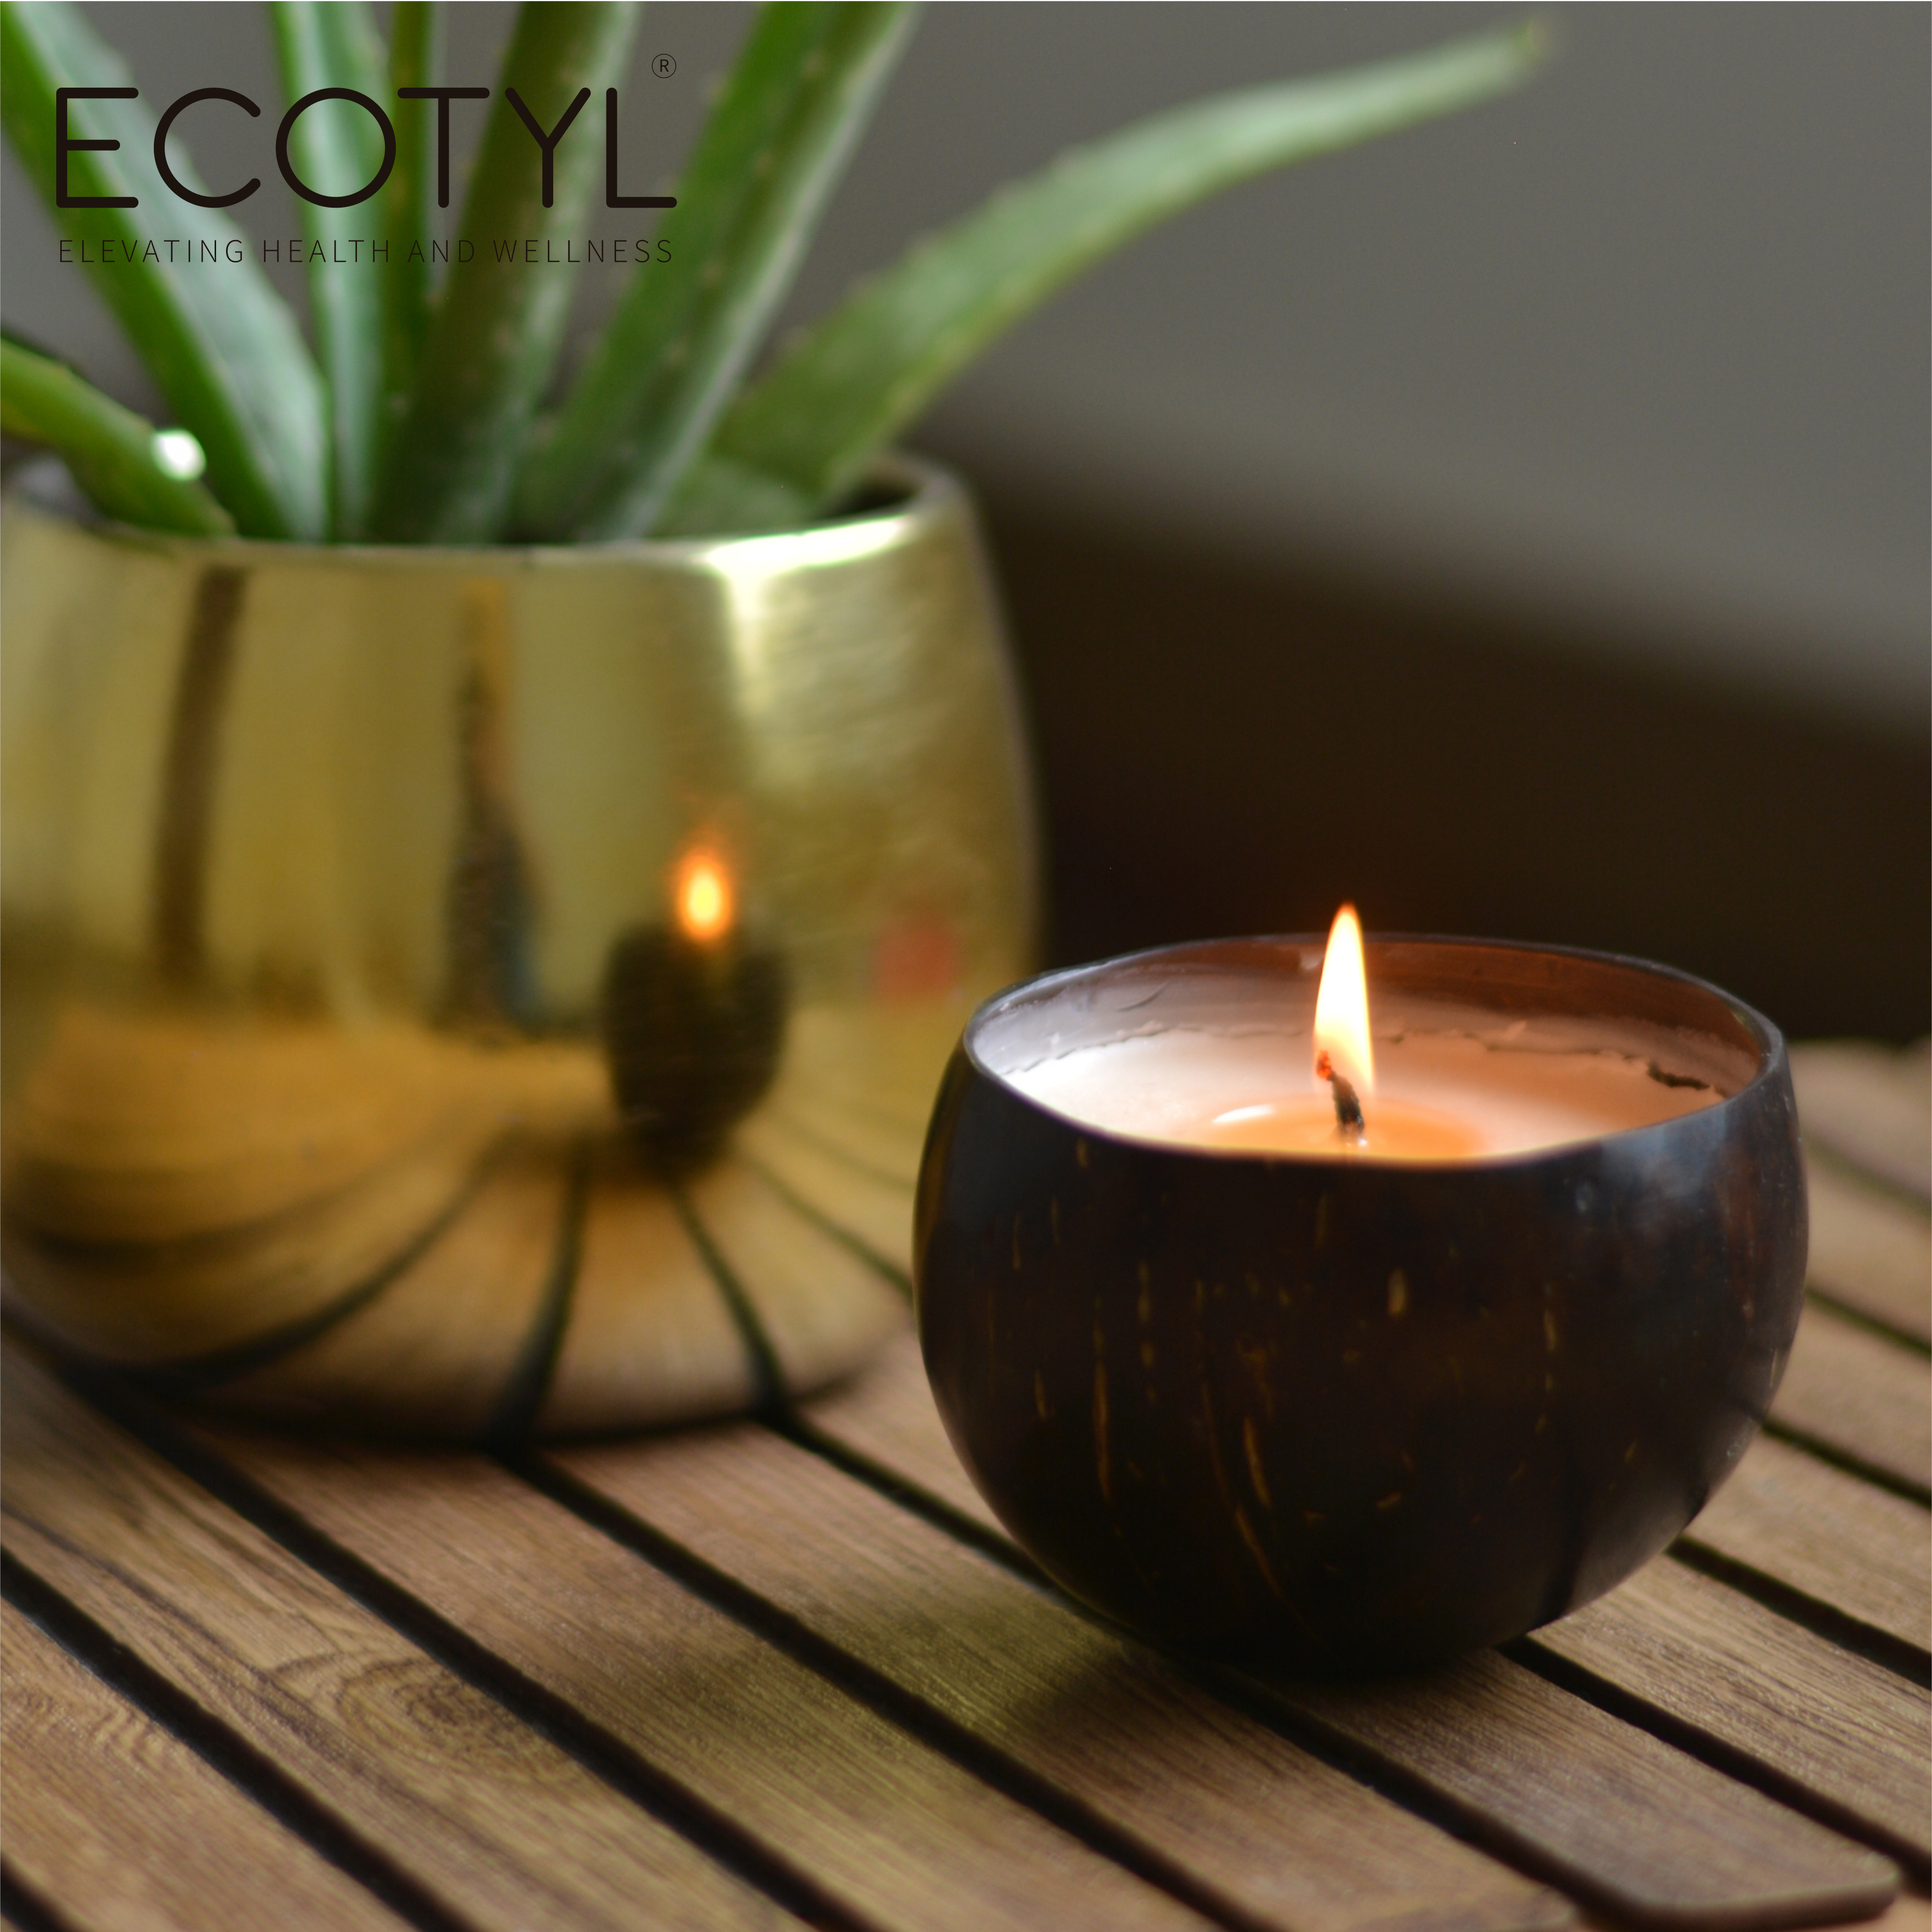 Ecotyl Coconut Shell Candle - Patchouli & Rosewood | Pure Soy Wax | 100g